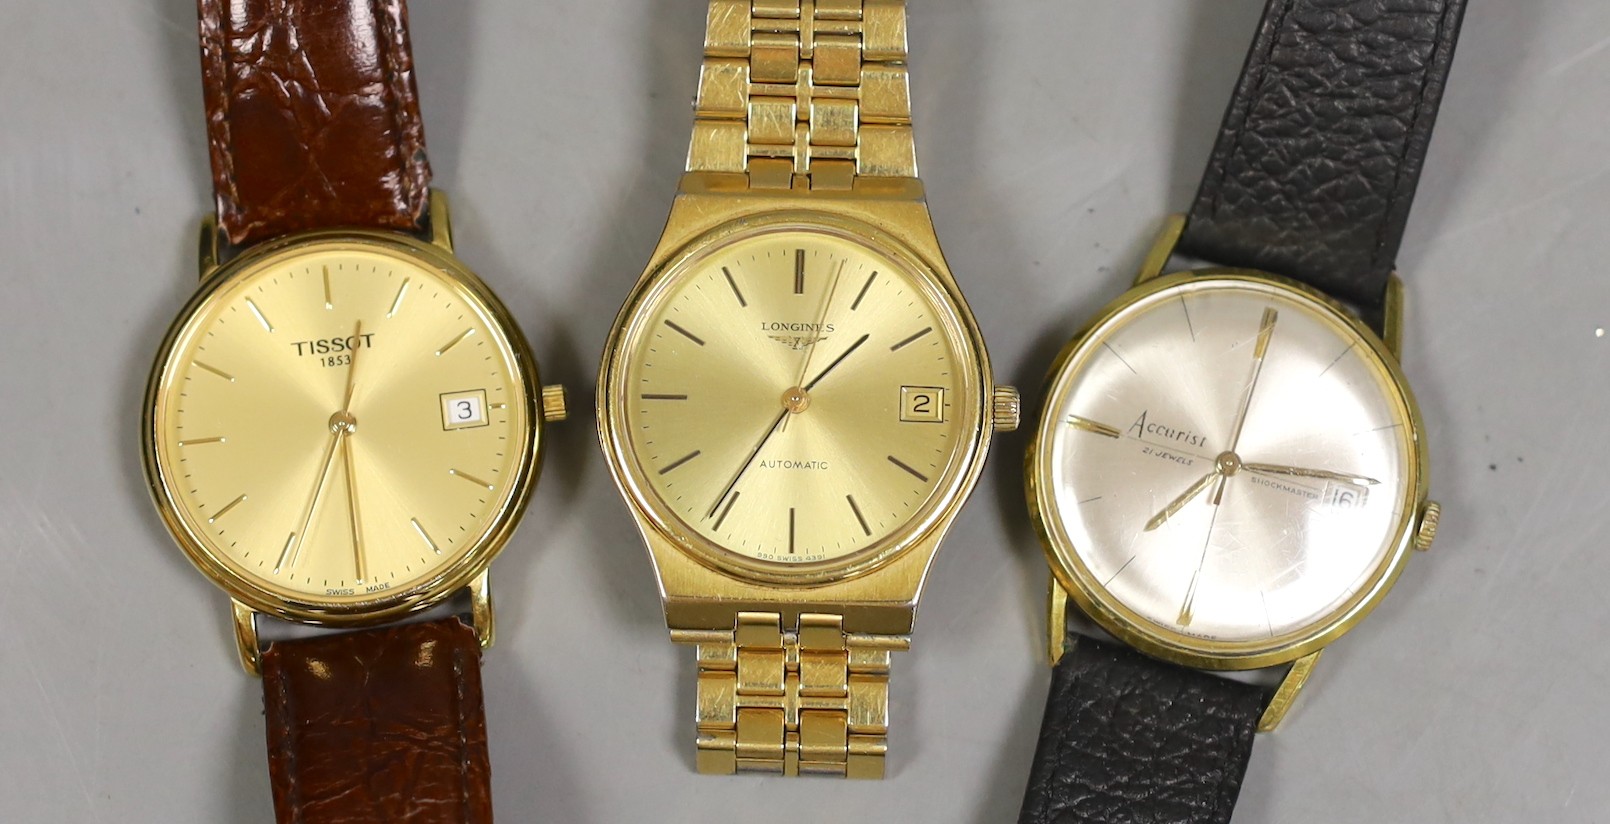 Three assorted gentleman's wrist watches, including a steel and gold plated Longines automatic, Tissot and Accurist.